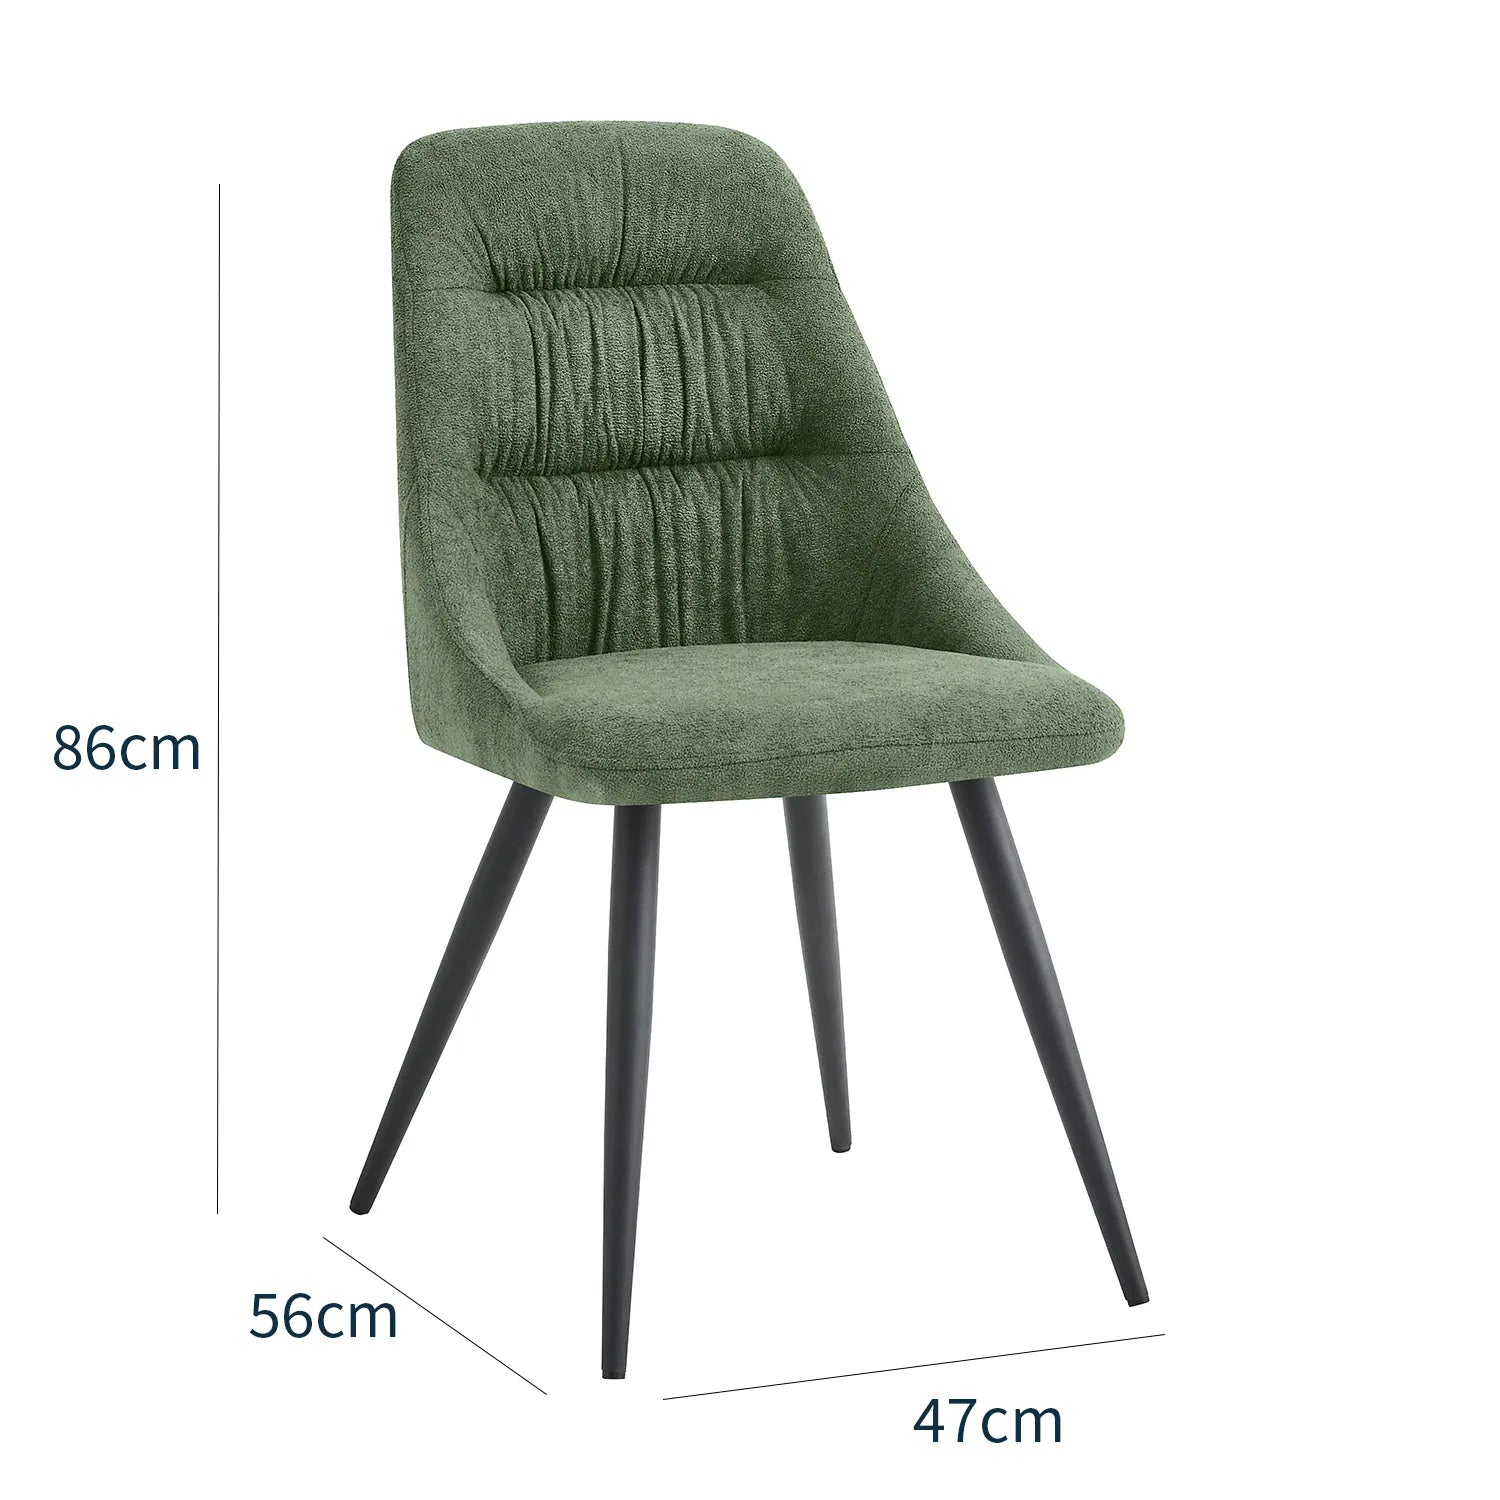 Corinth Linen Effect Green Dining Chairs - Set of 4